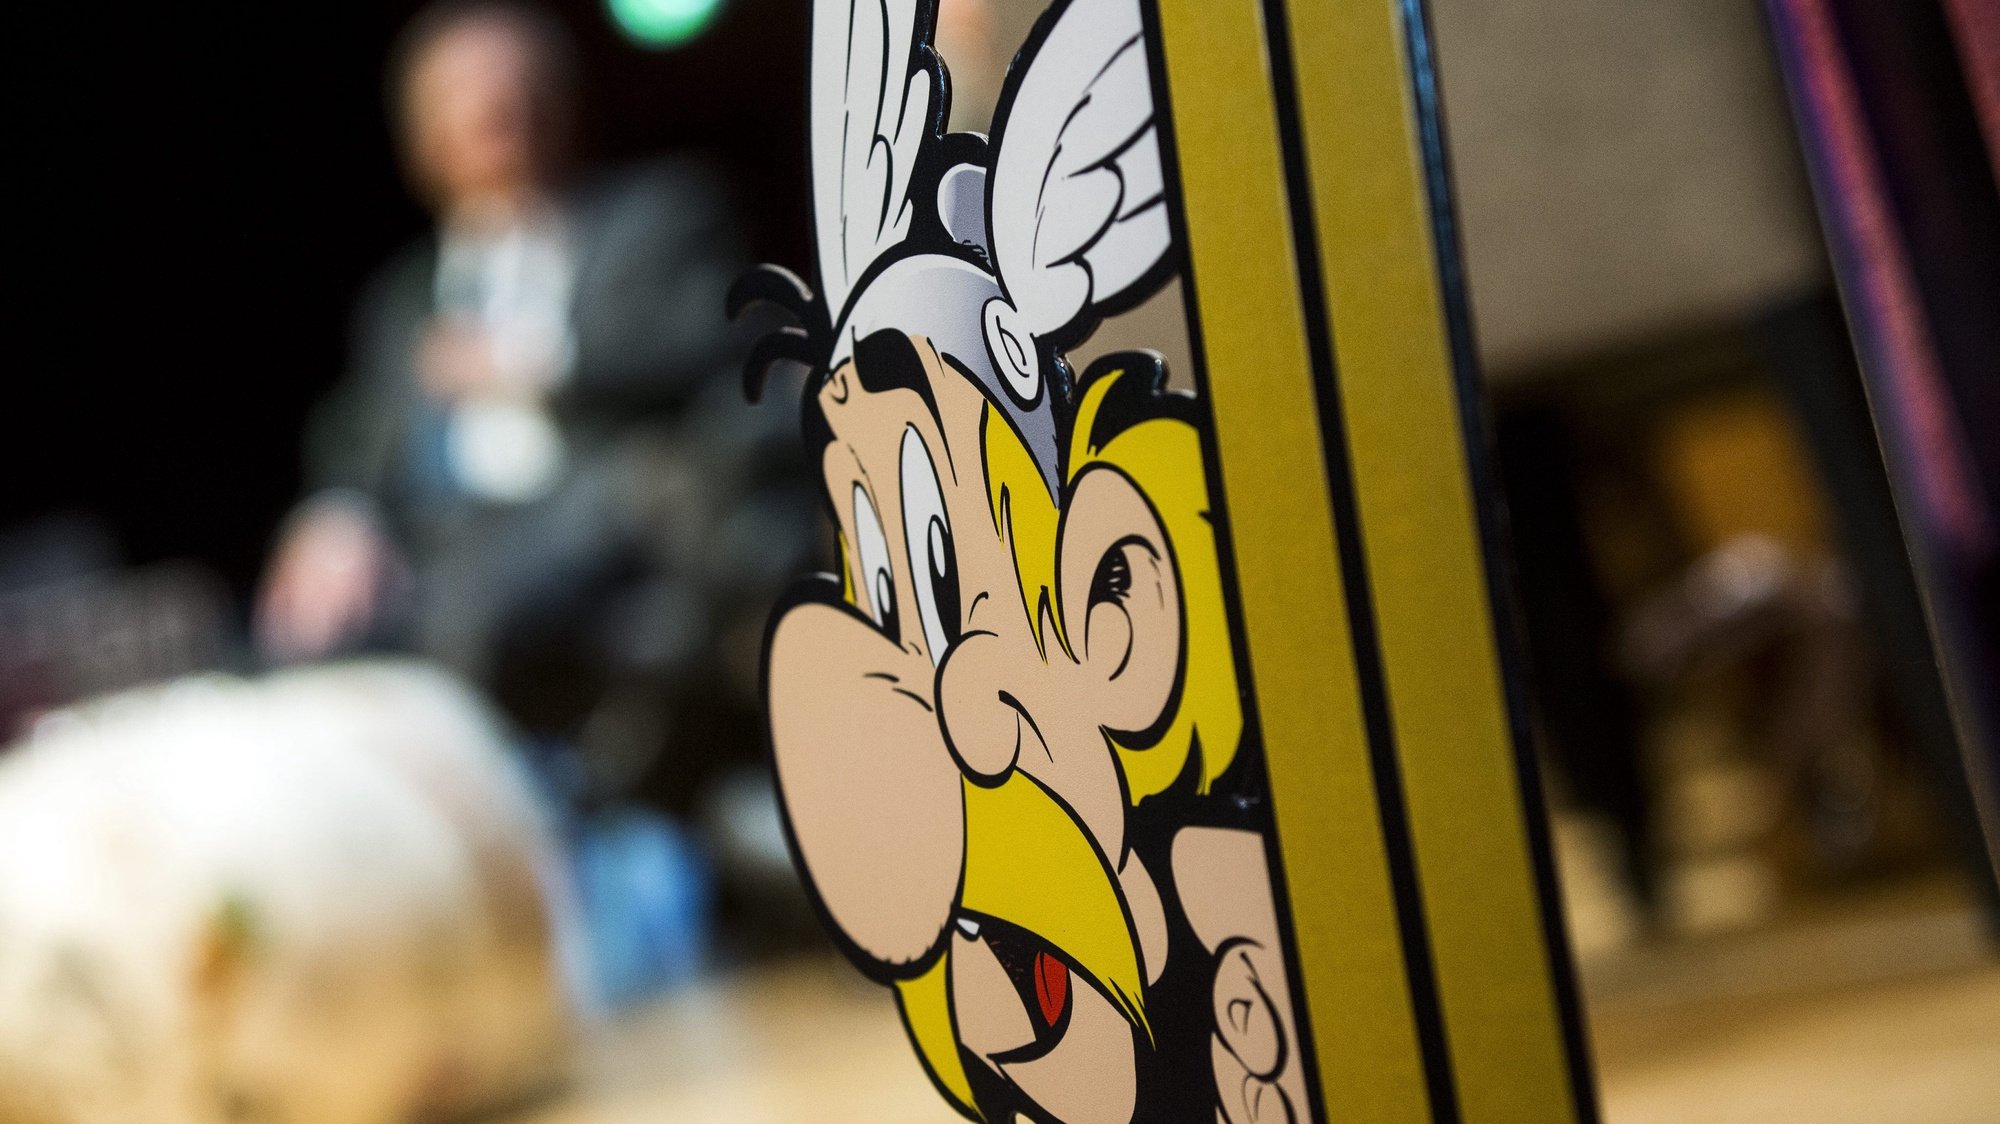 epa04974836 A picture of cartoon character Asterix is displayed during a press conference presenting the 36th album of the adventures of the two Gauls entitled &#039;Le Papyrus de Cesar&#039; (Cesar&#039;s Papyrus) at the Eiffel Tower in Paris, France, 12 October 2015. This album will be released worldwide on 22 October. This is the second album created by French cartoonist Didier Conrad and scenarist Yves Ferri.  EPA/ETIENNE LAURENT